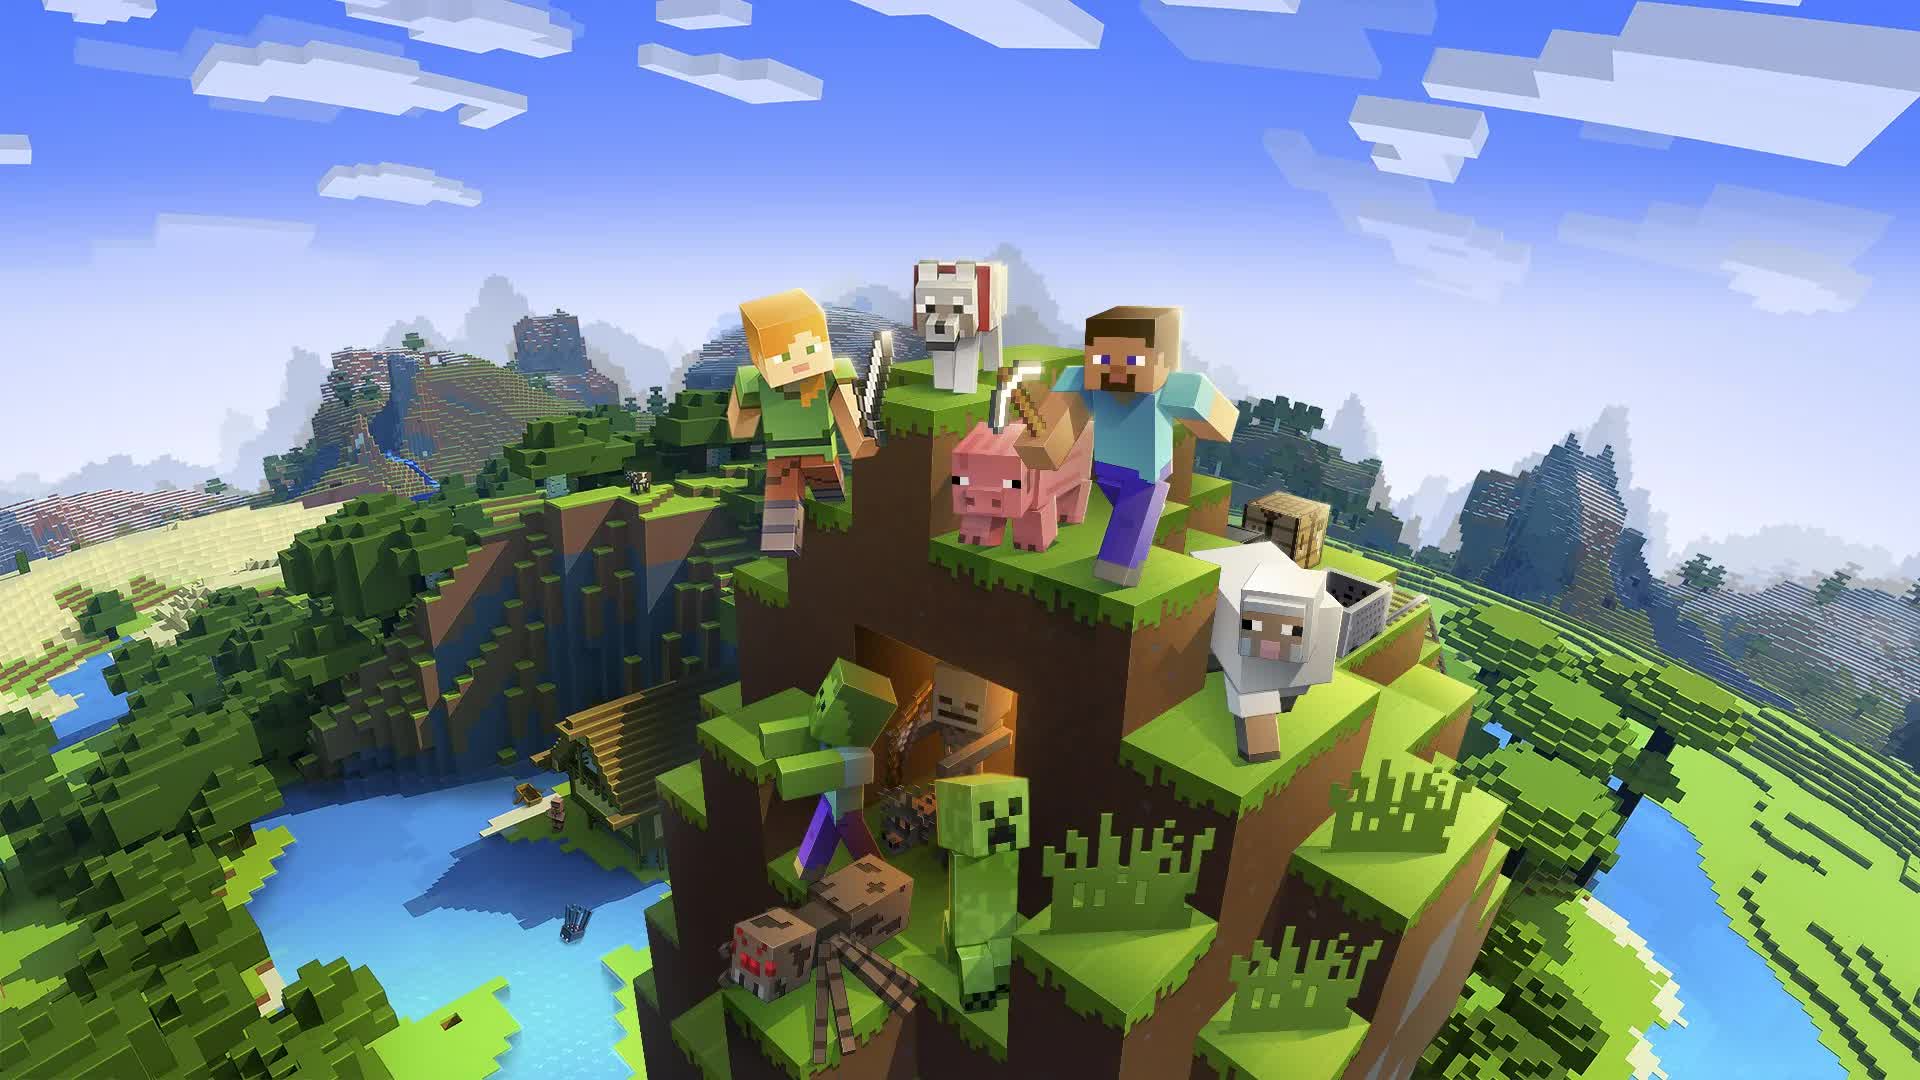 Mojang Studios is adding PS VR support to Minecraft later this month